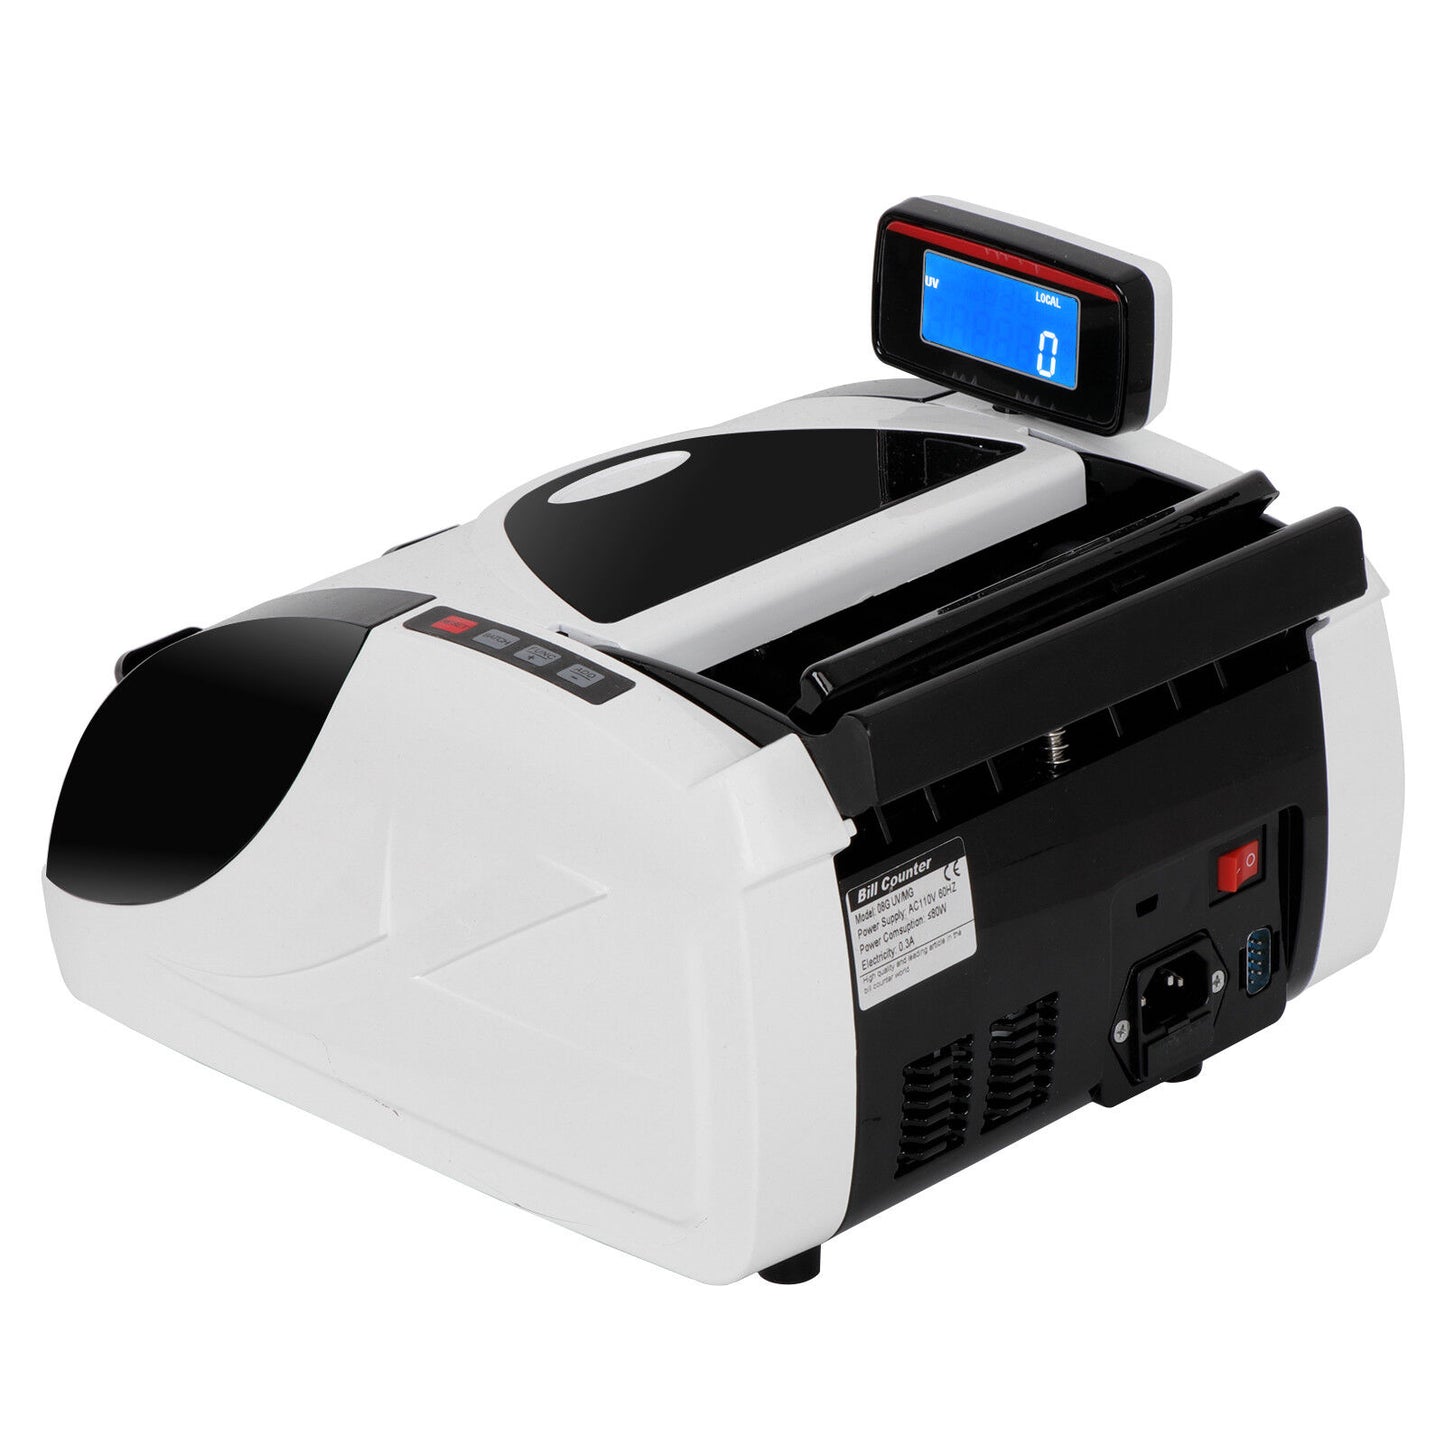 Money Bill Counter Cash Currency Counting Machine UV MG Counterfeit Detector USD